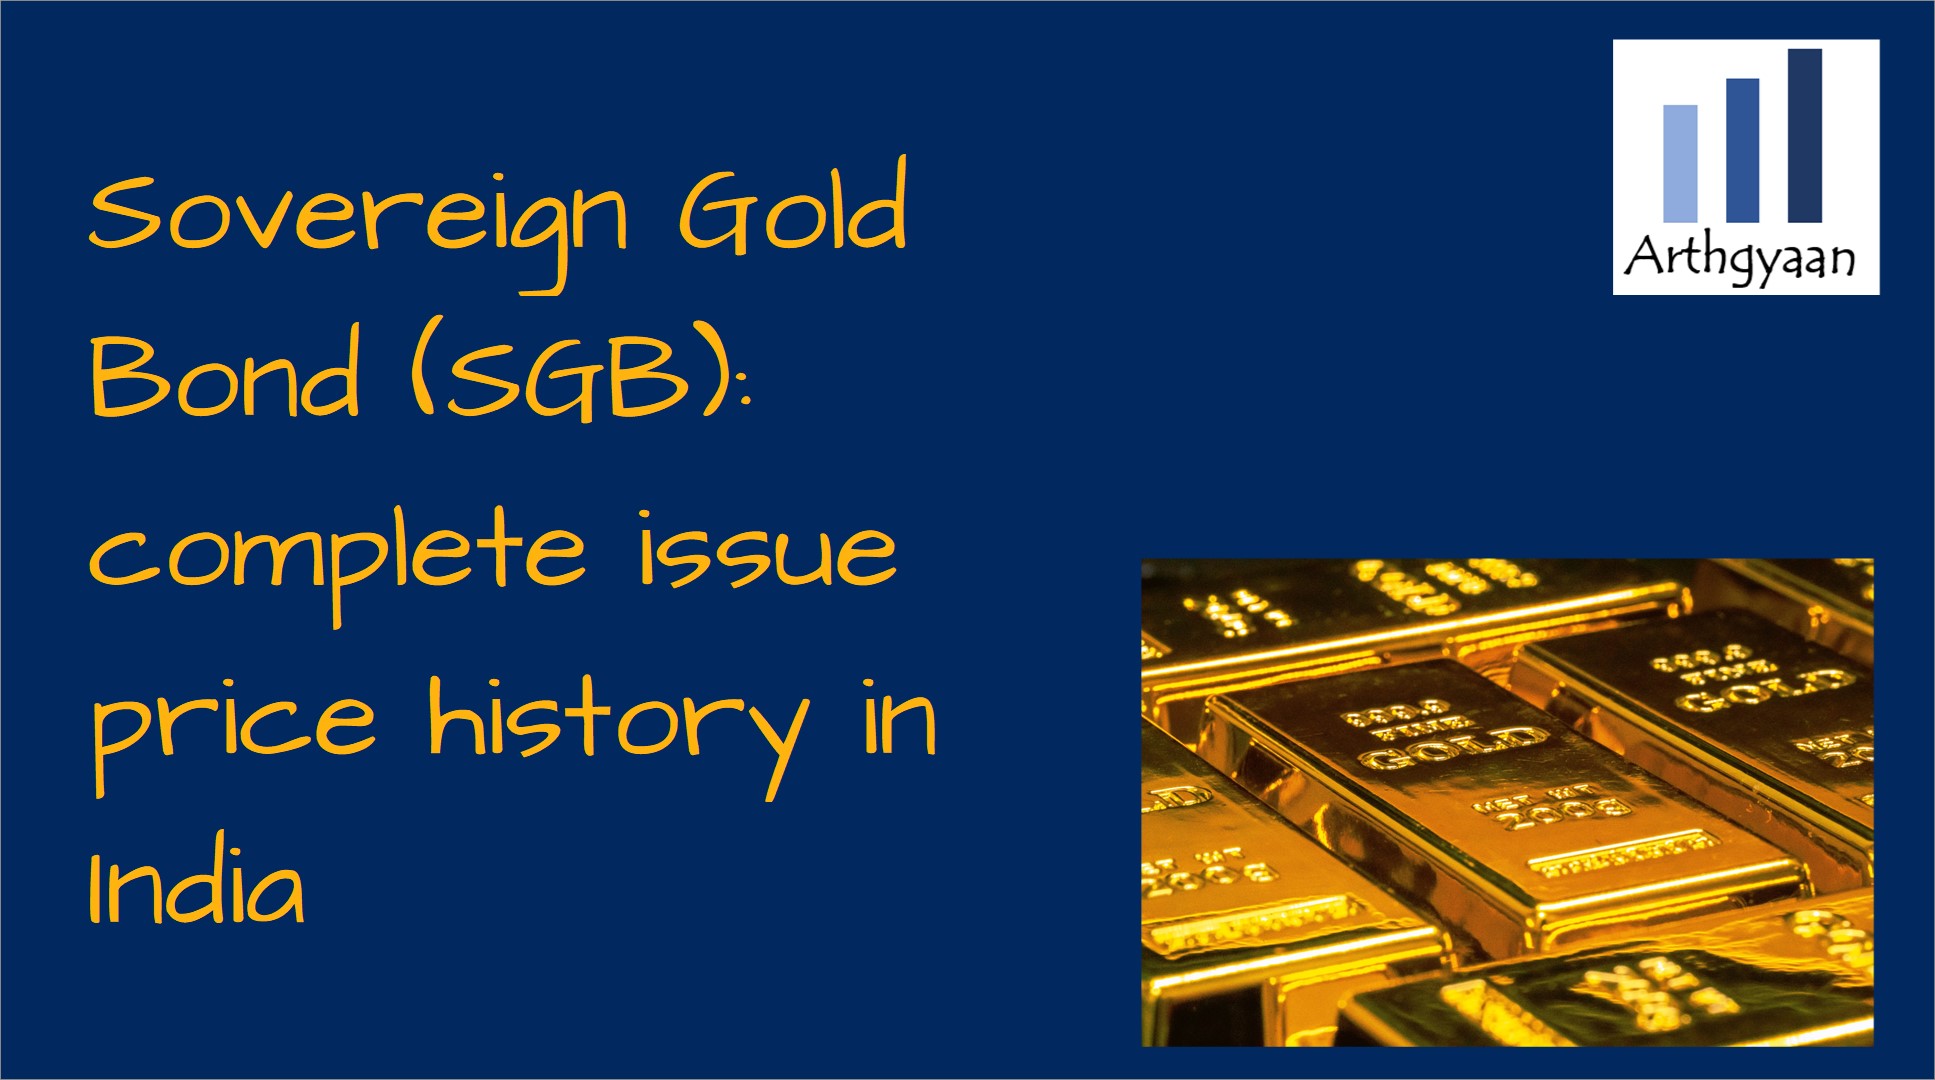 Sovereign Gold Bond (SGB): complete issue price history in India